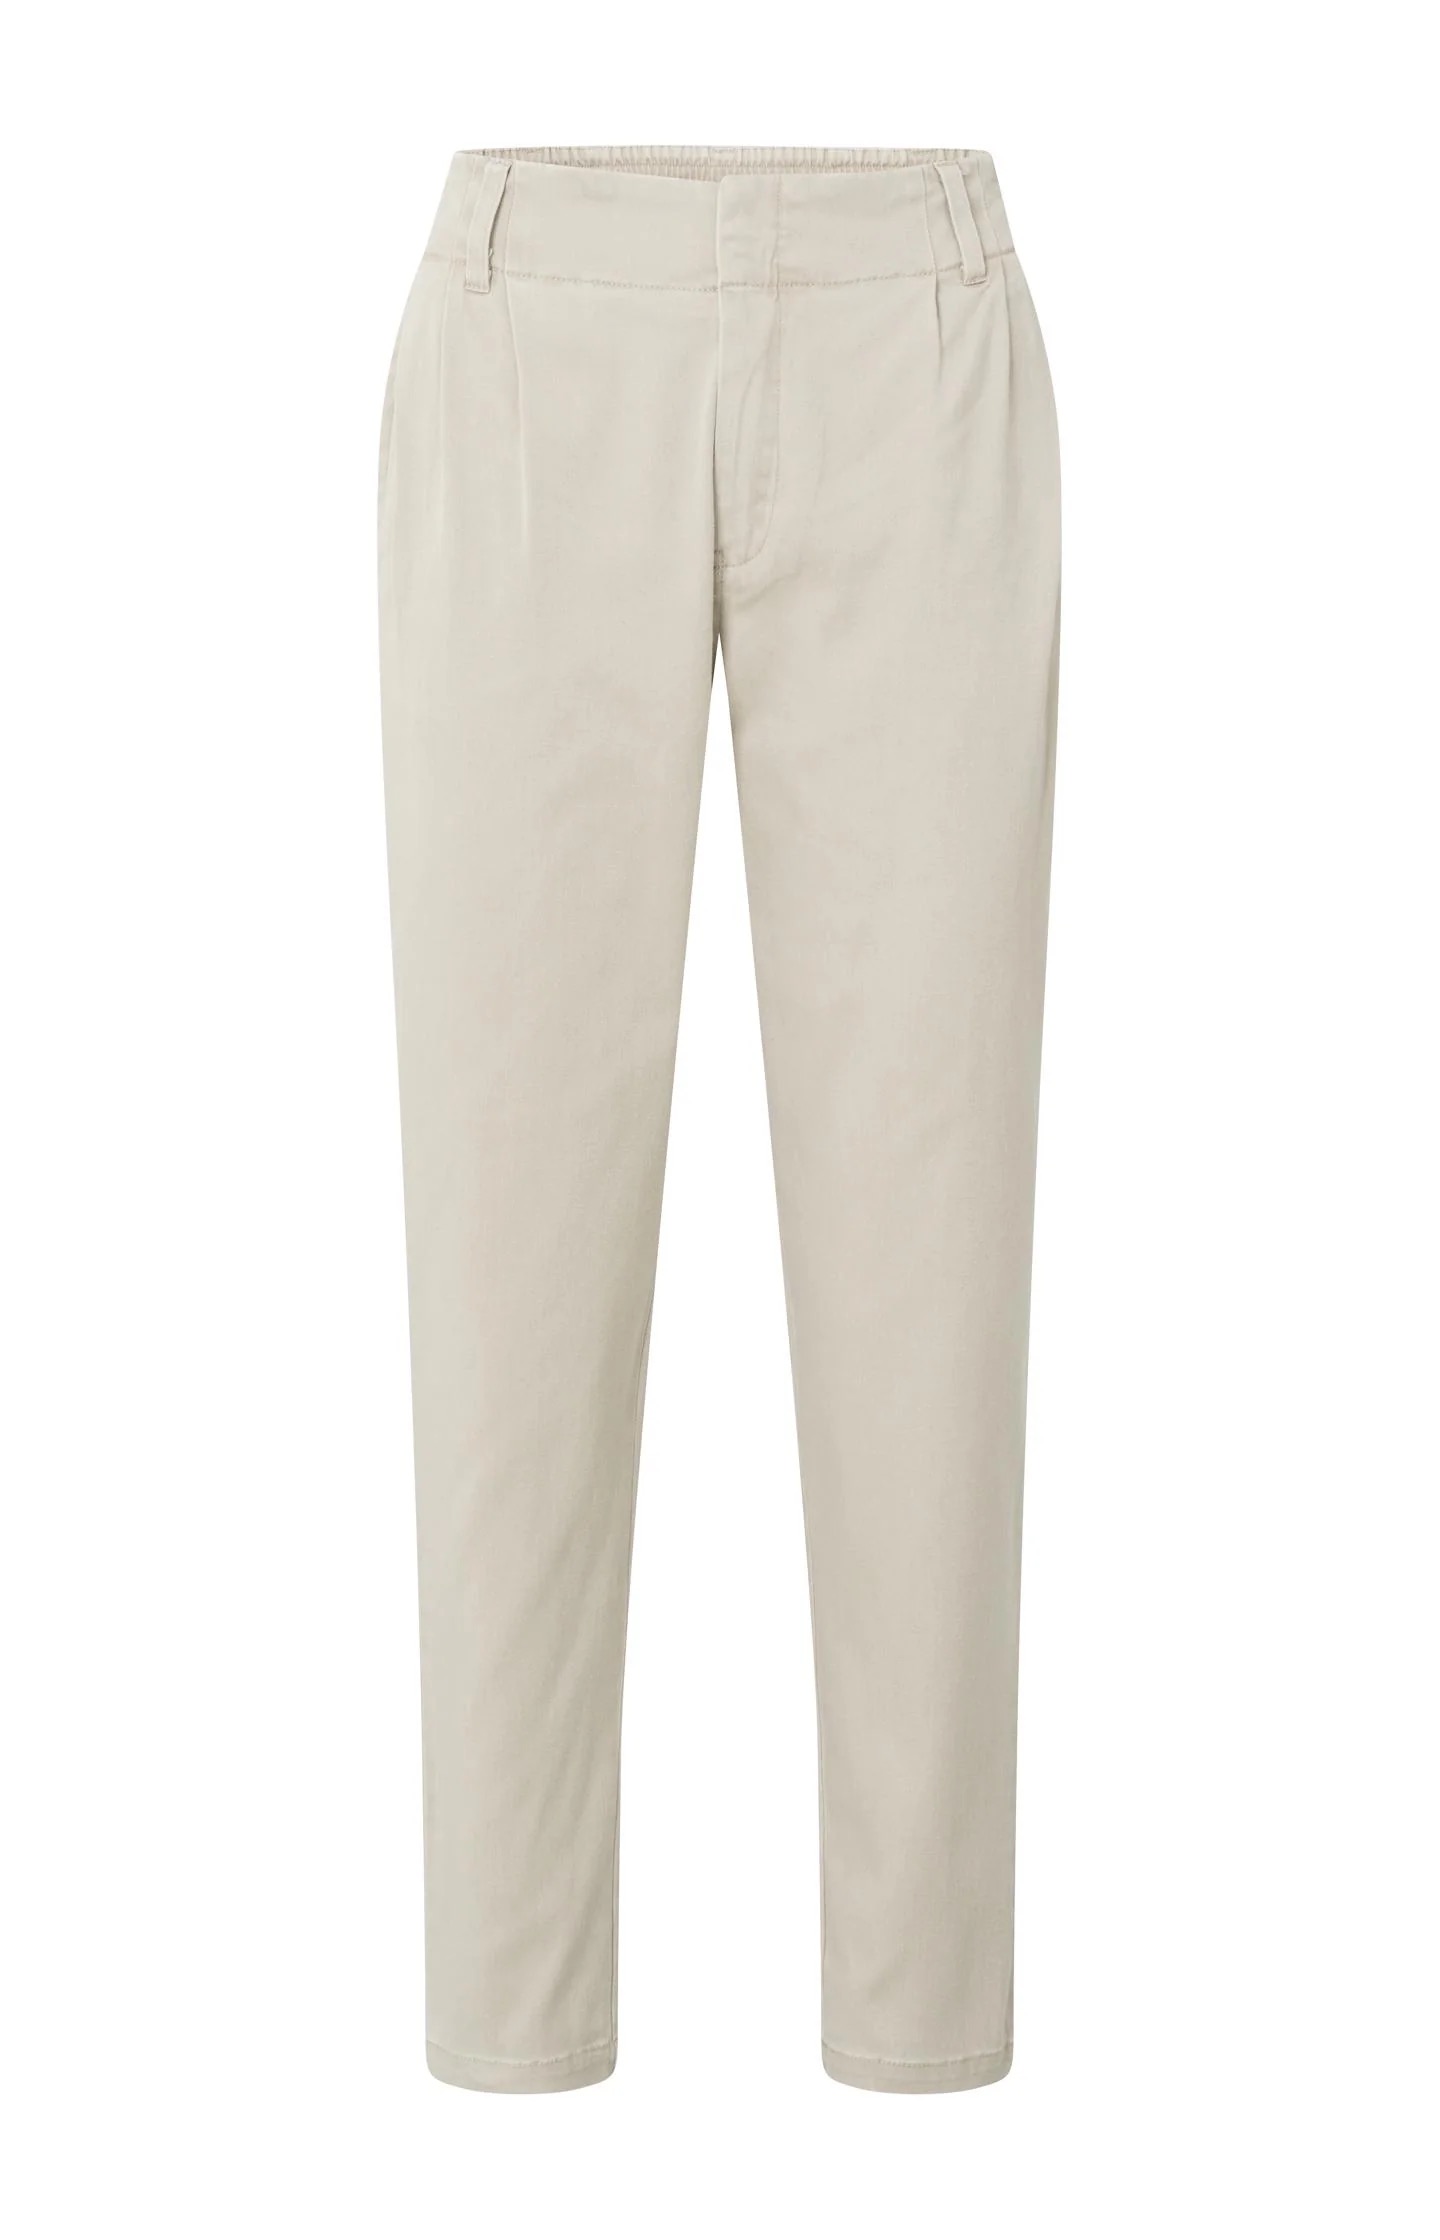 Yaya Woven Loose Fit Trousers With Pleats And Elasticated Waist | Gray Morn Beige